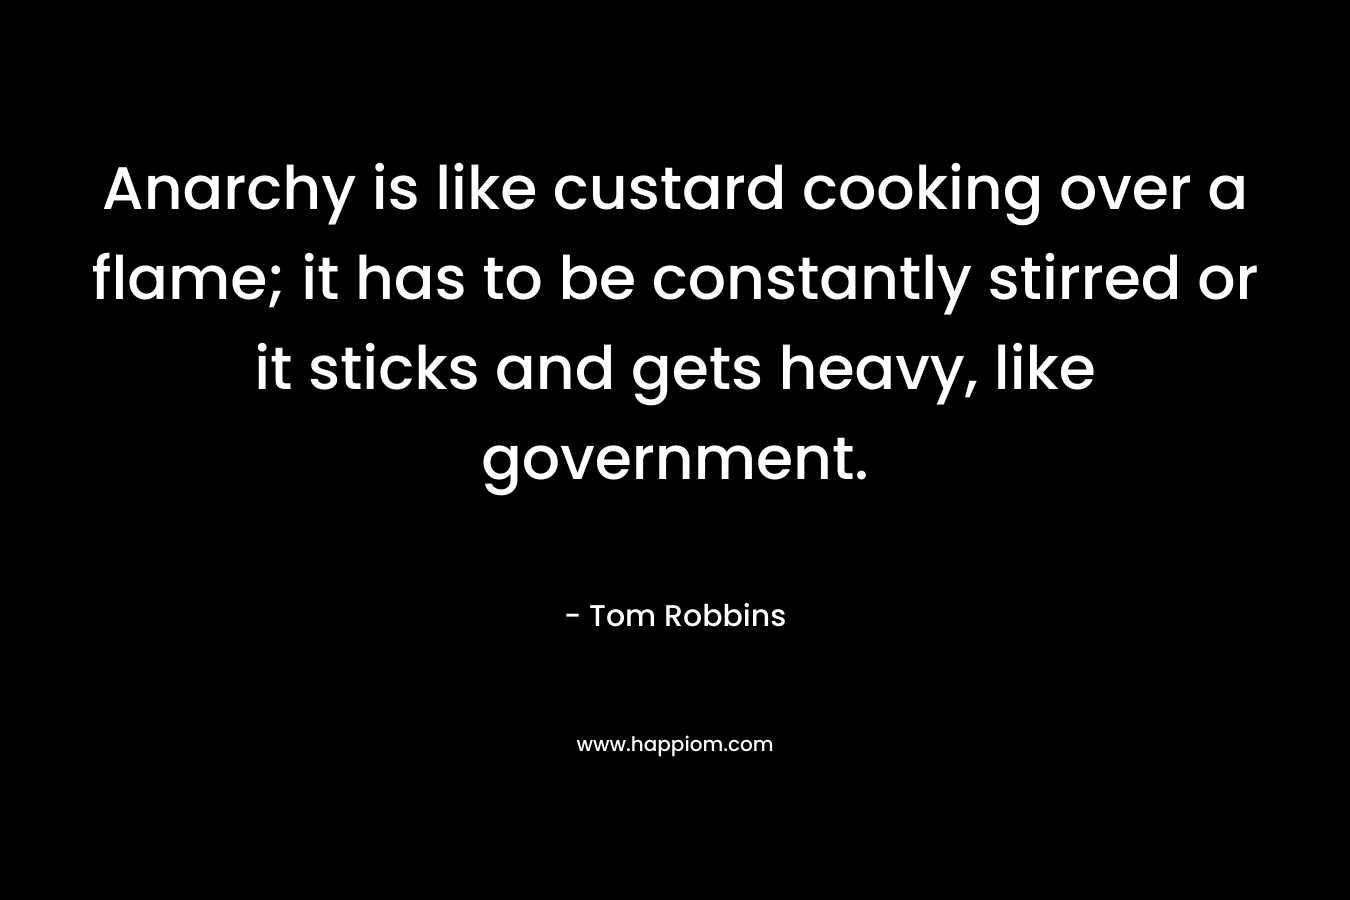 Anarchy is like custard cooking over a flame; it has to be constantly stirred or it sticks and gets heavy, like government.